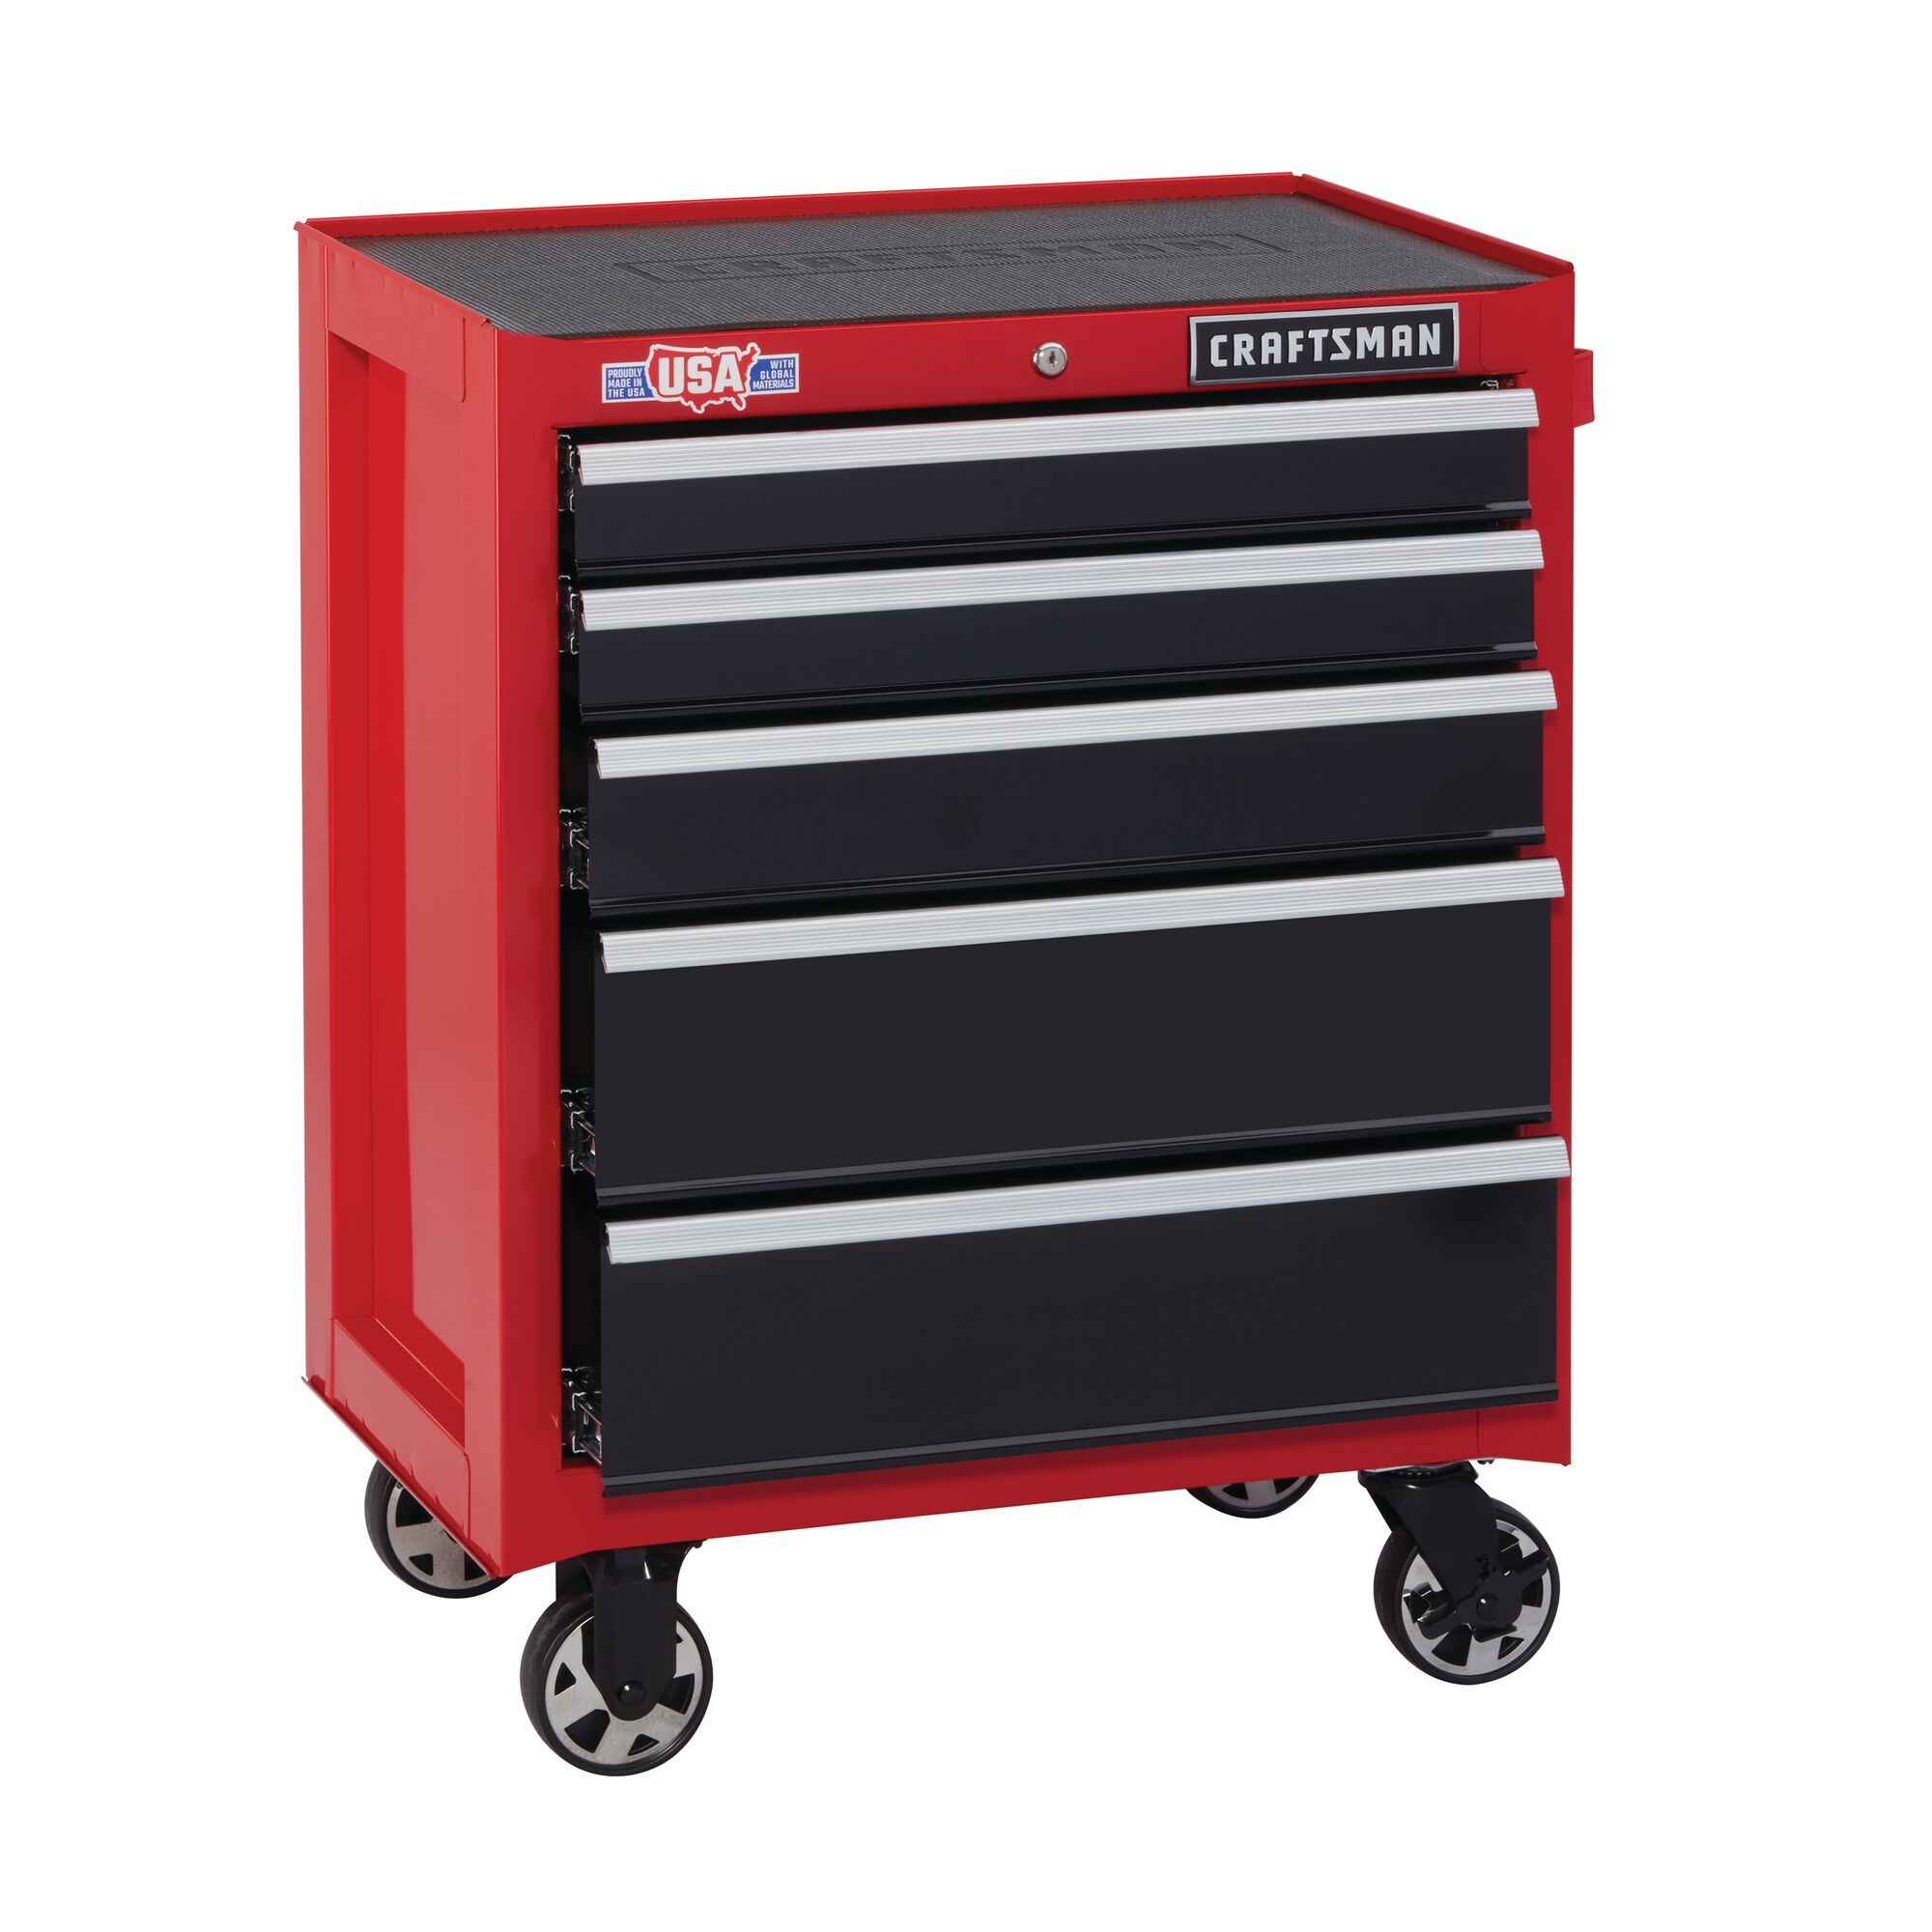 CRAFTSMAN 2000 Series 26.5-in W x 34-in H 5-Drawer Steel Rolling